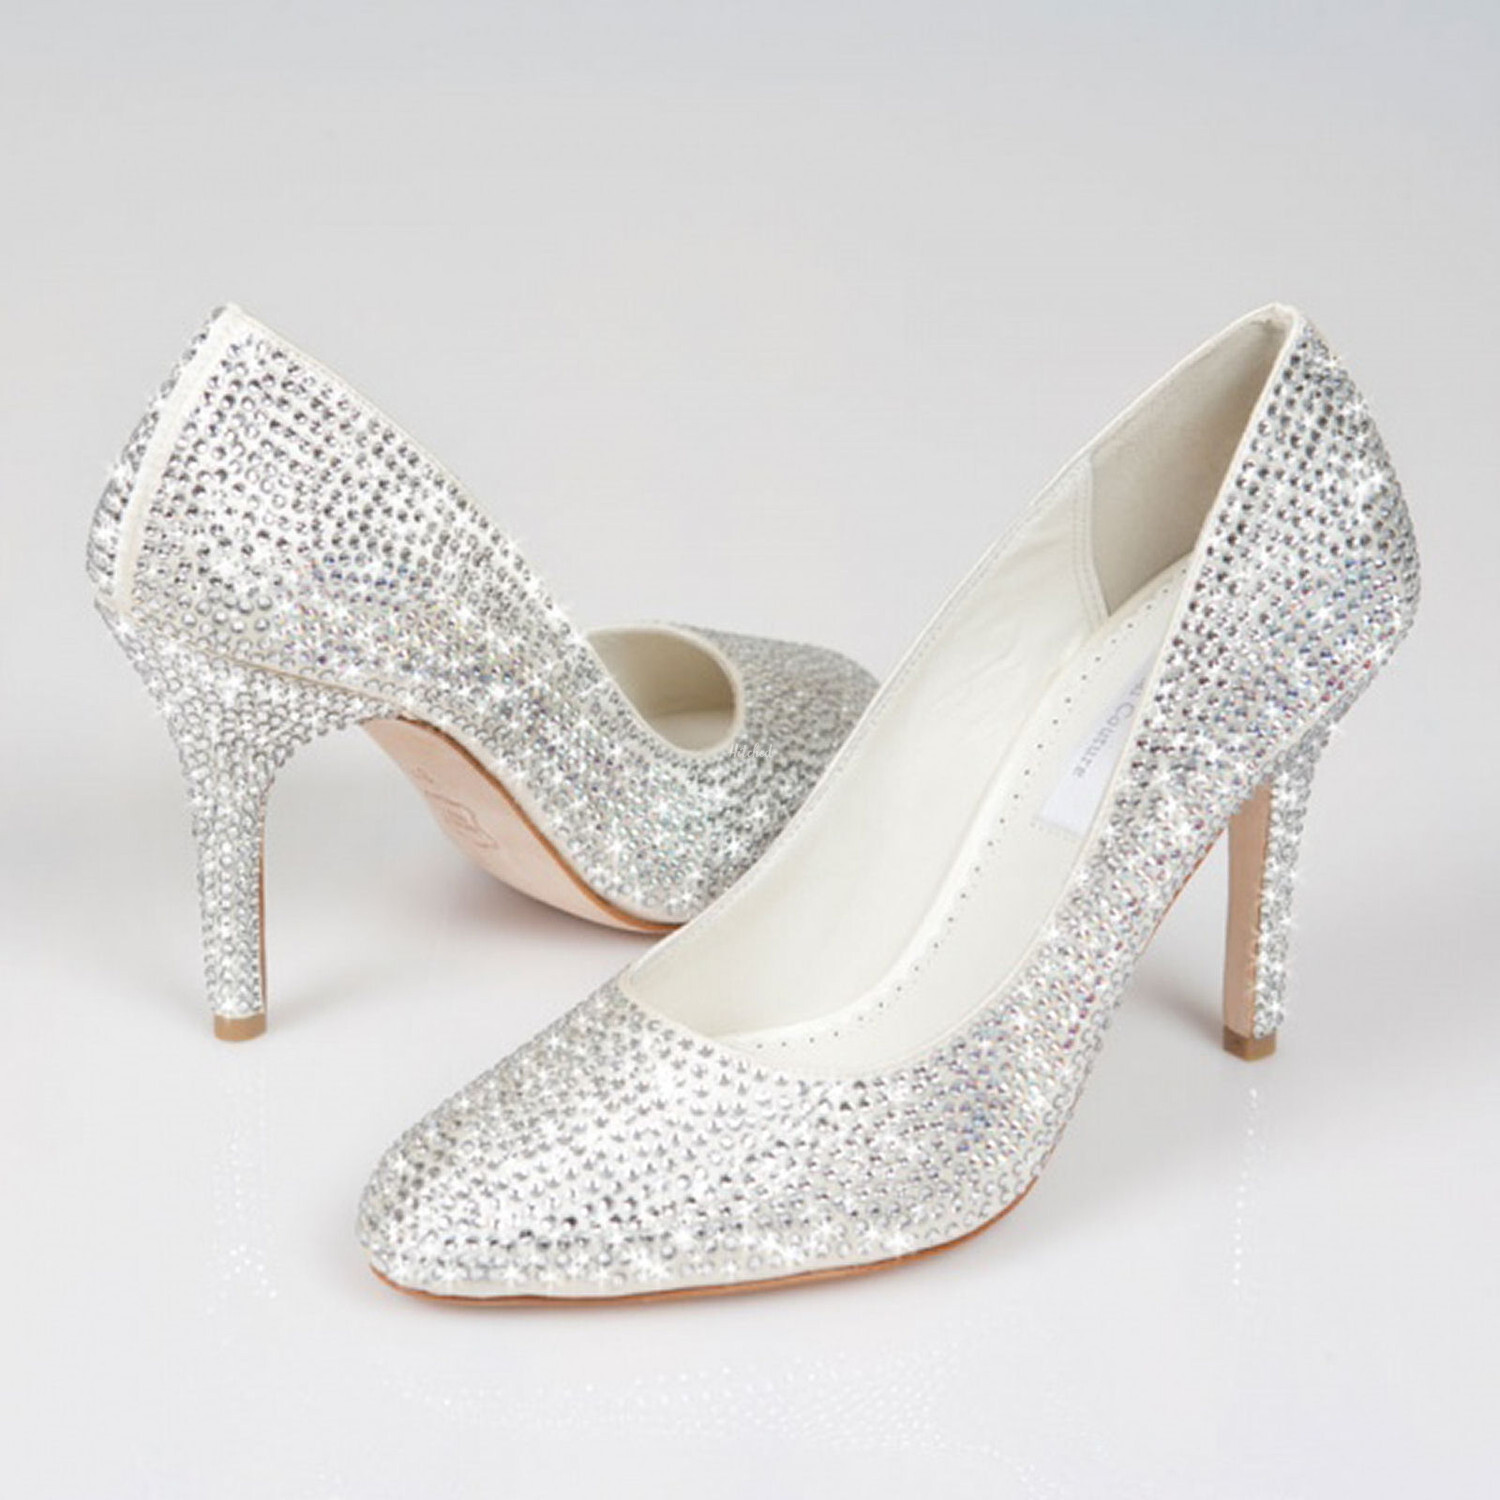 Swarovski Crystal Bridal Shoes Wedding Shoes from Crystal Couture -  